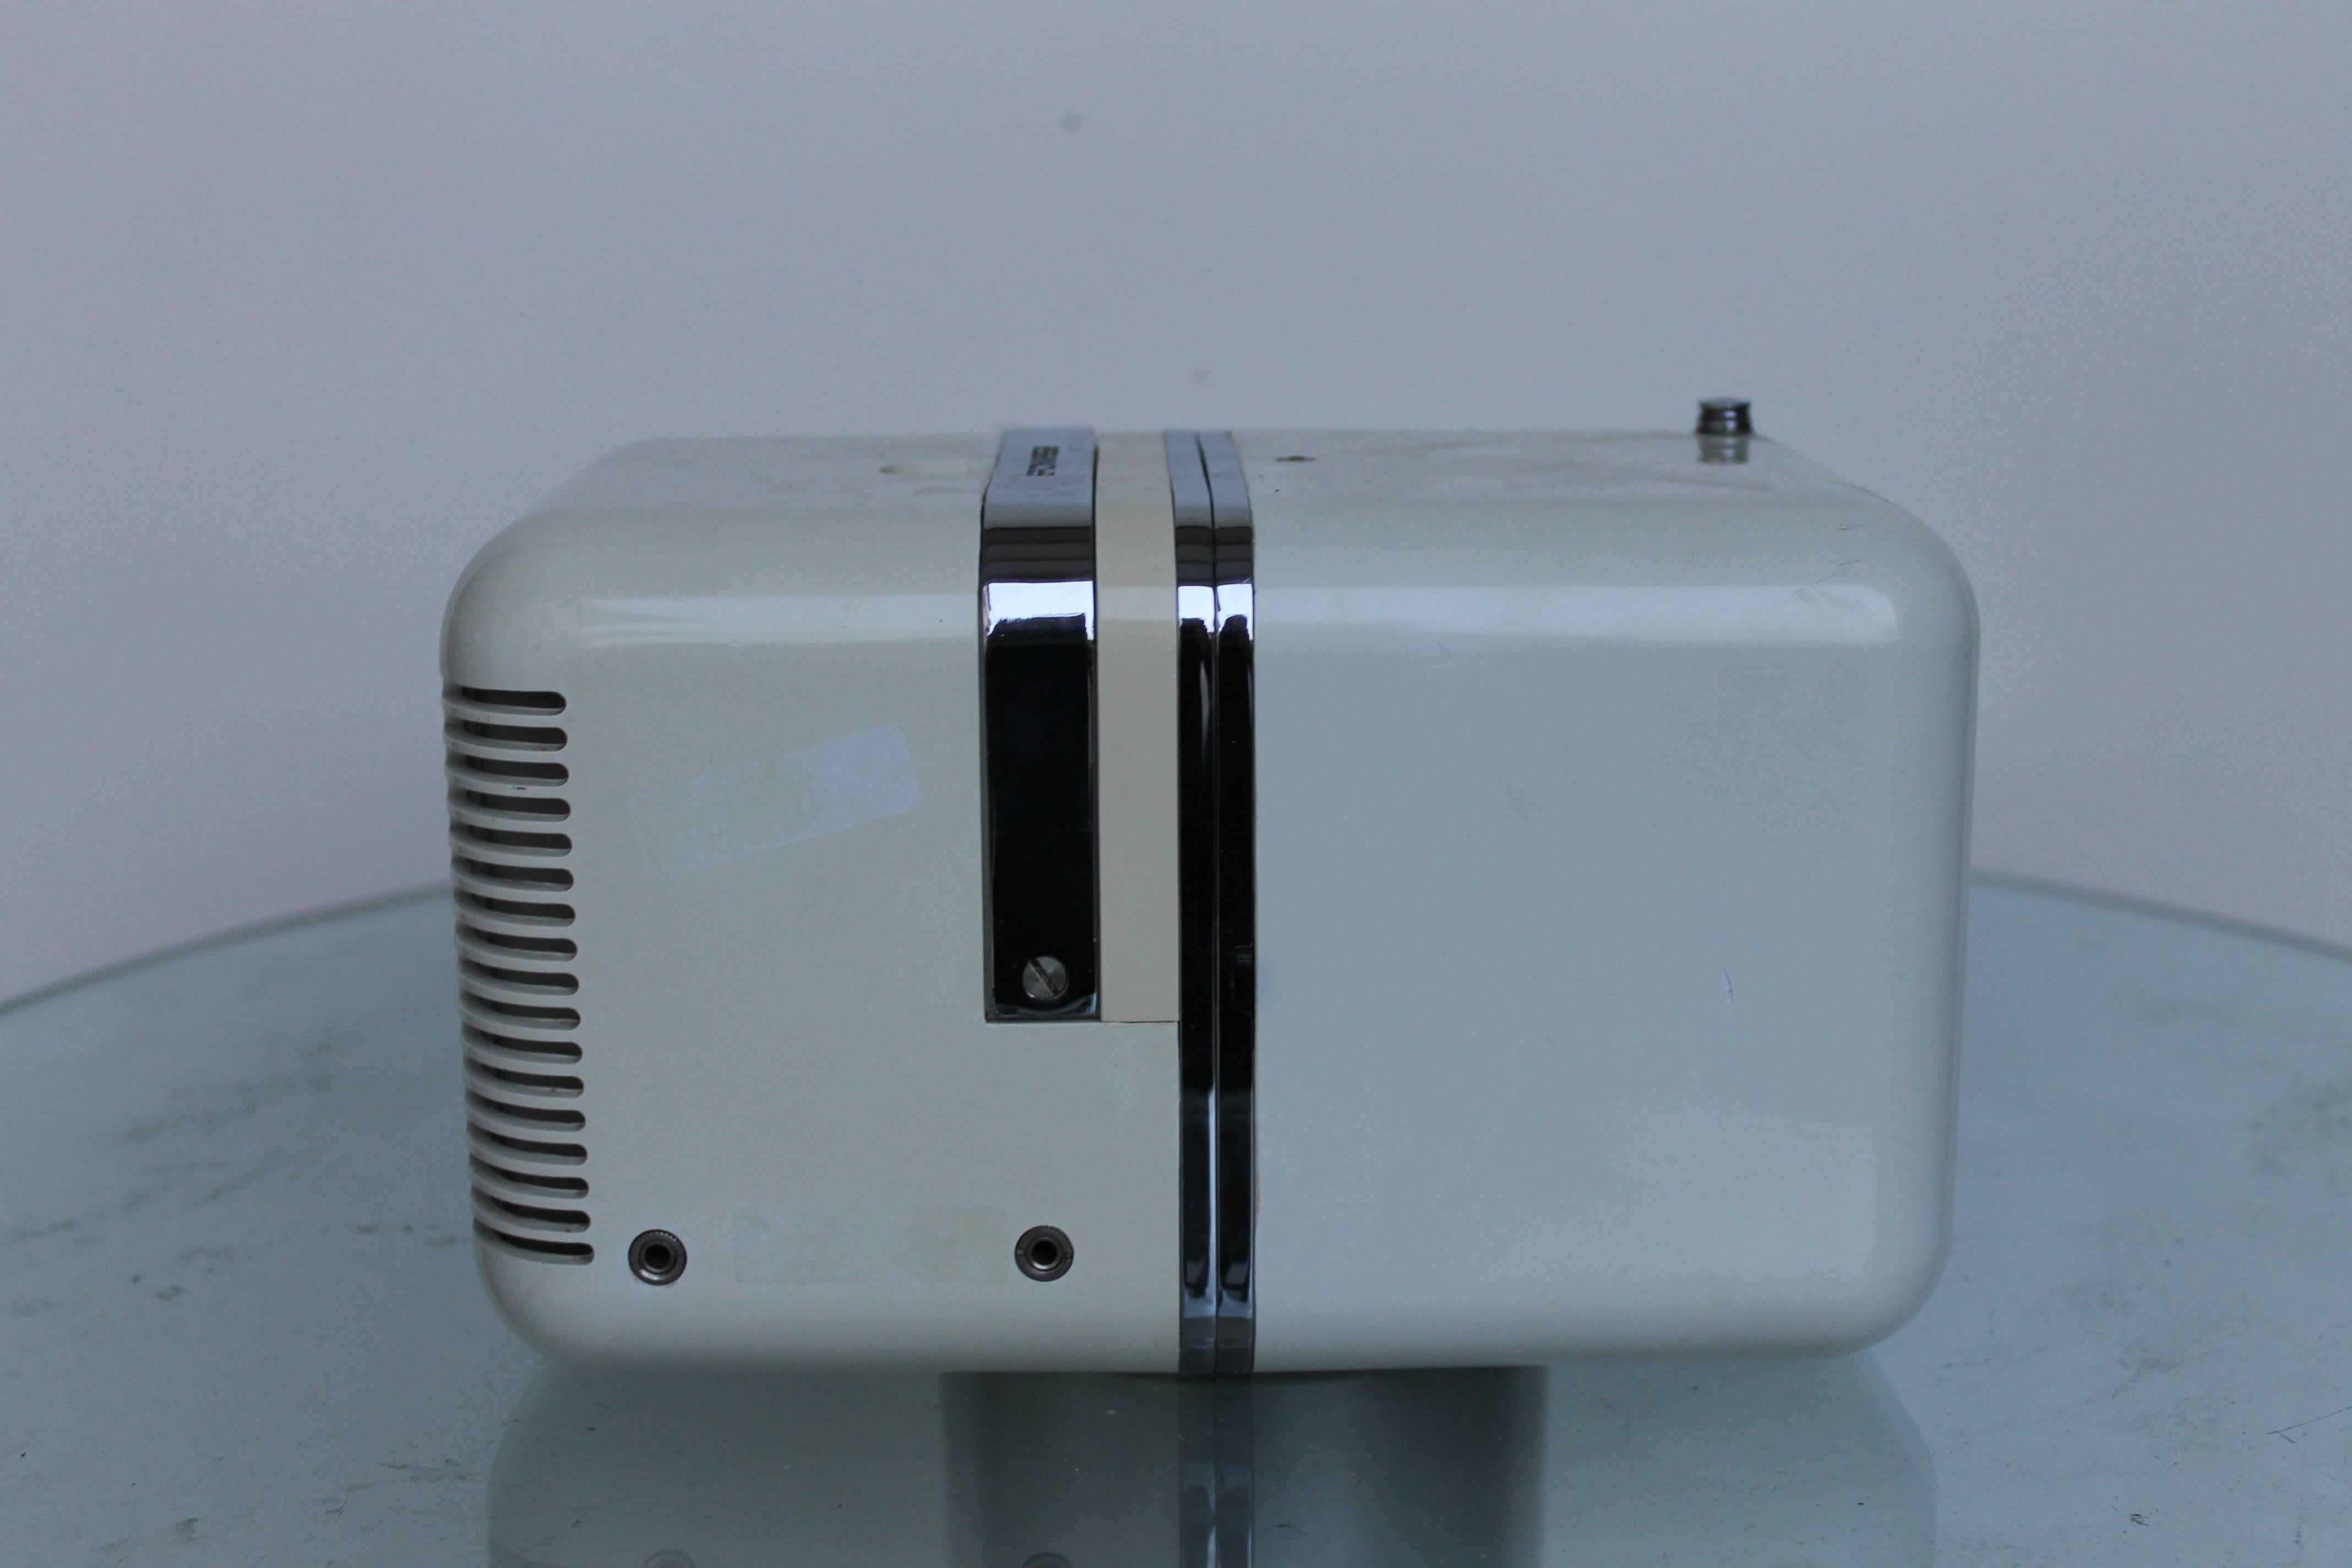 TS-502 cube radio by Brionvega, a cult object of Italian design. The item still works, even if it has a little bump on the back (as pictures).